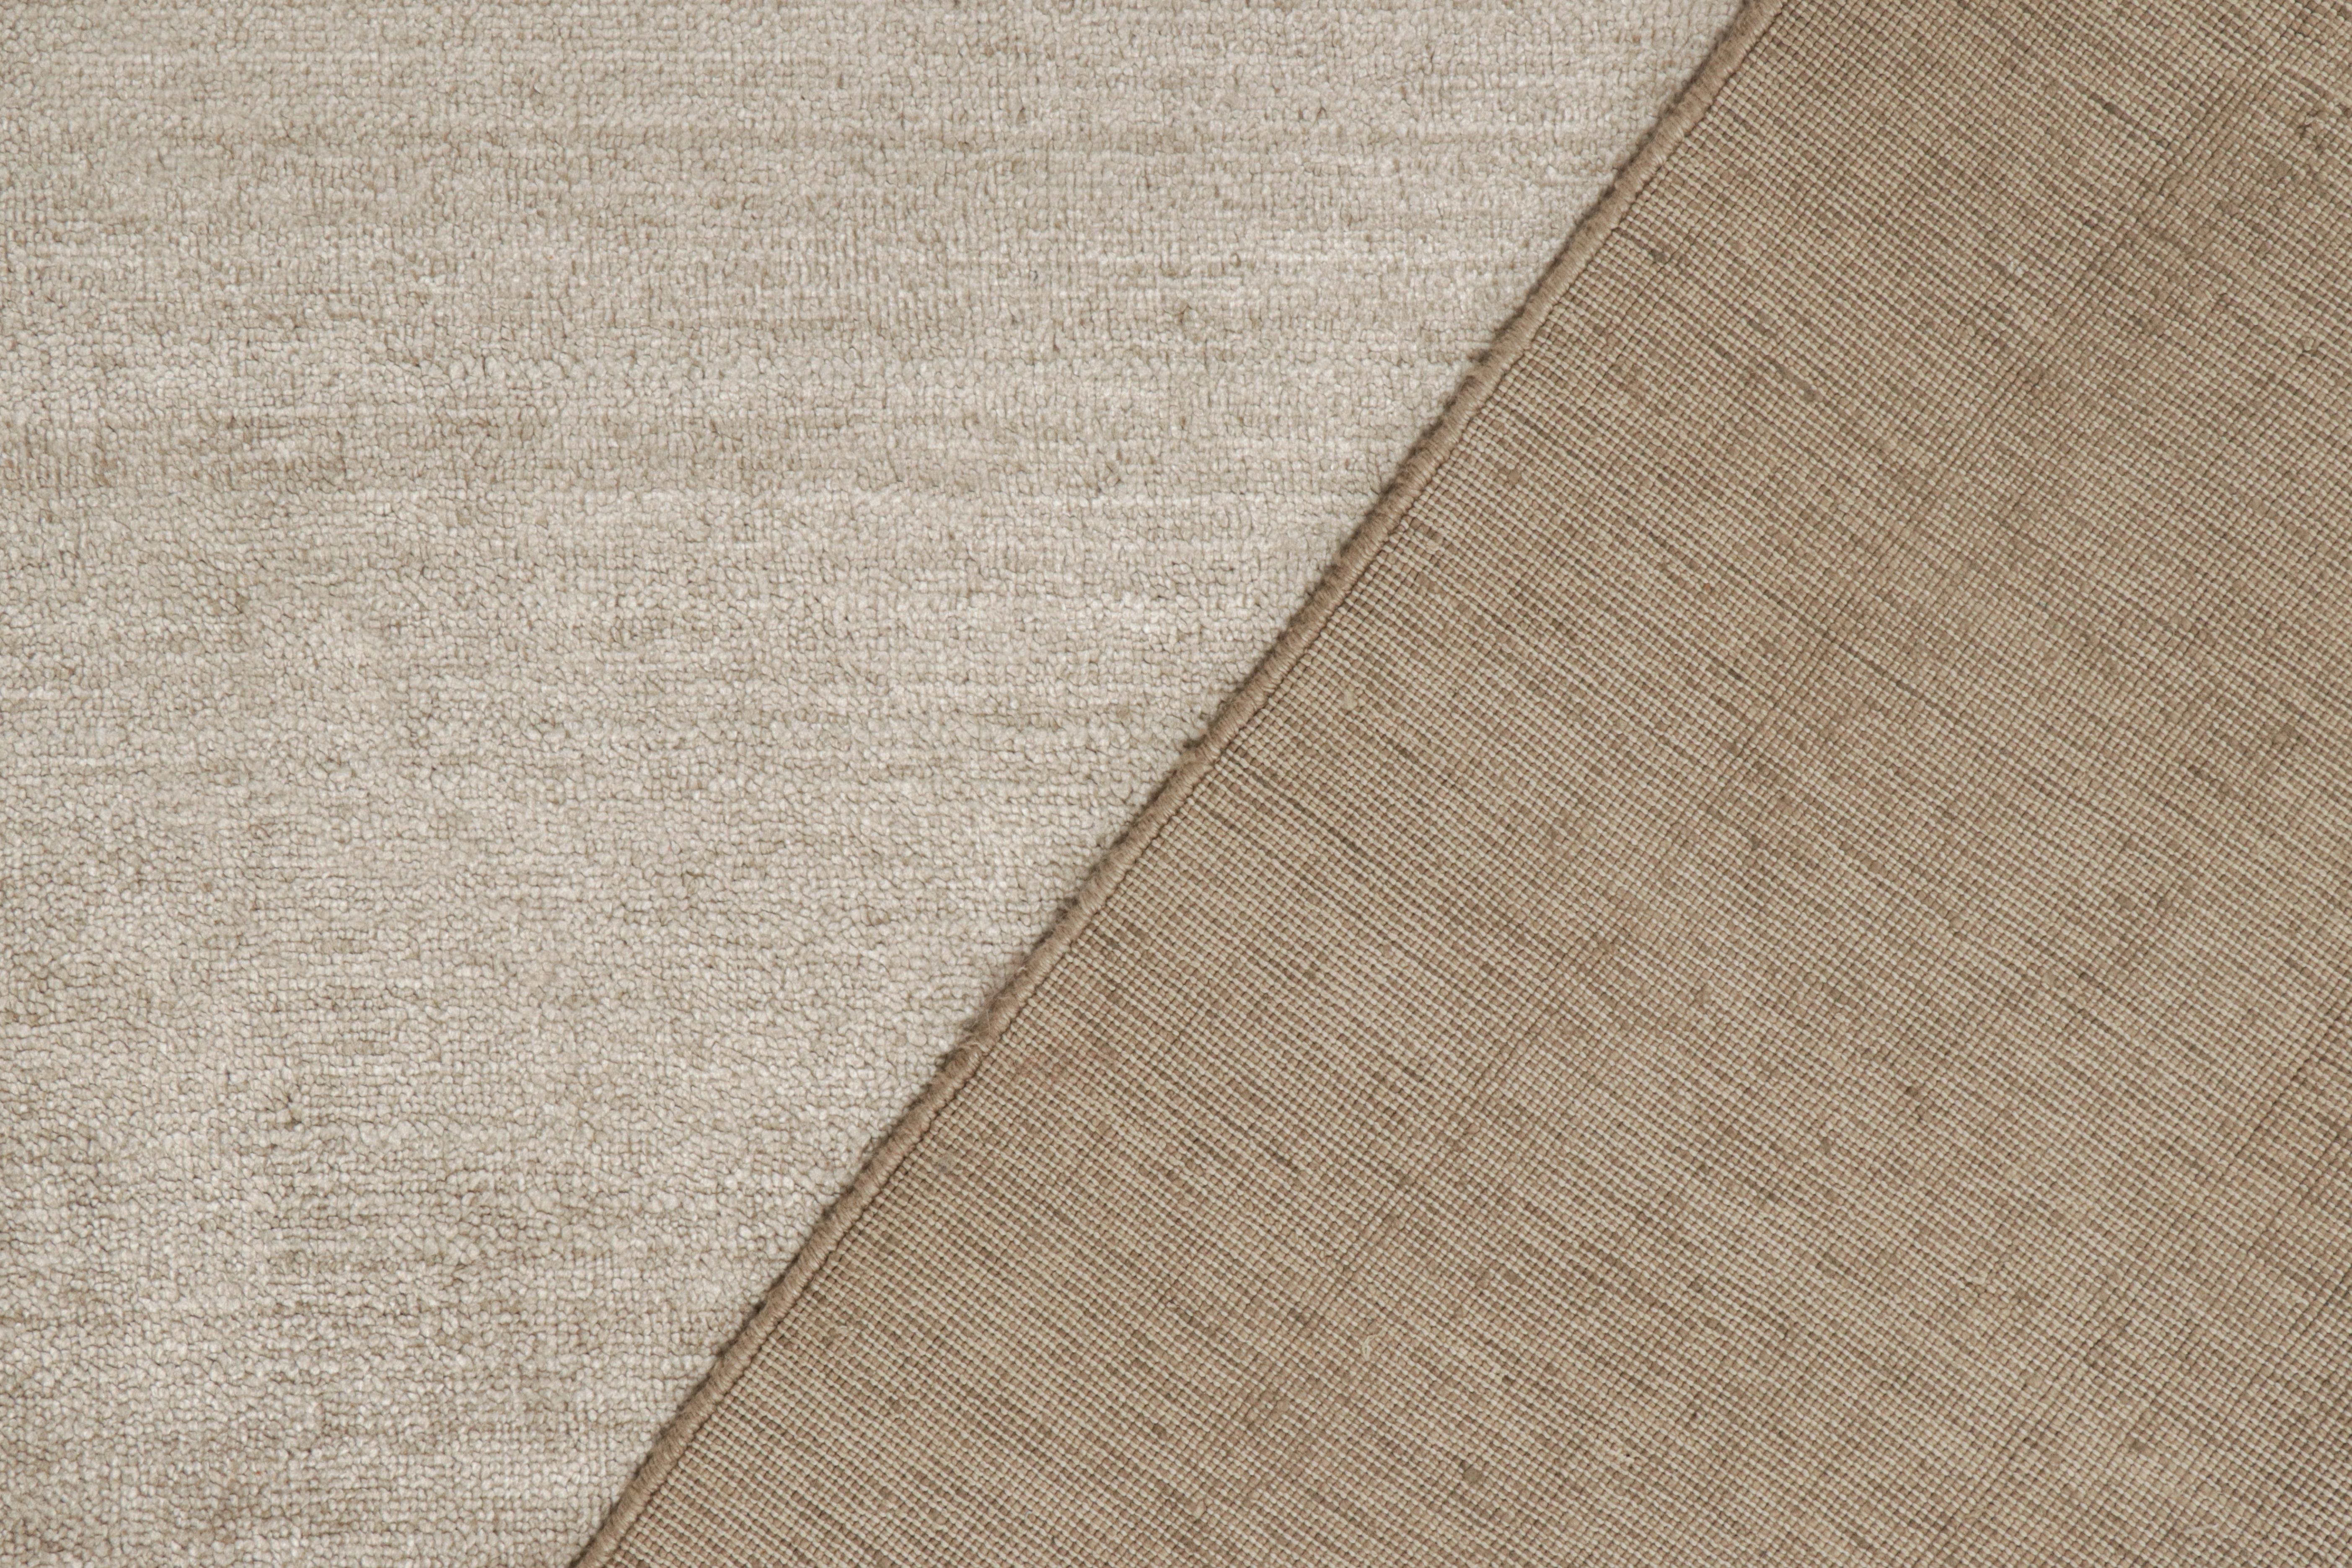 Rug & Kilim’s Contemporary Palace-Sized Solid Rug in Beige and Gray Tones 1